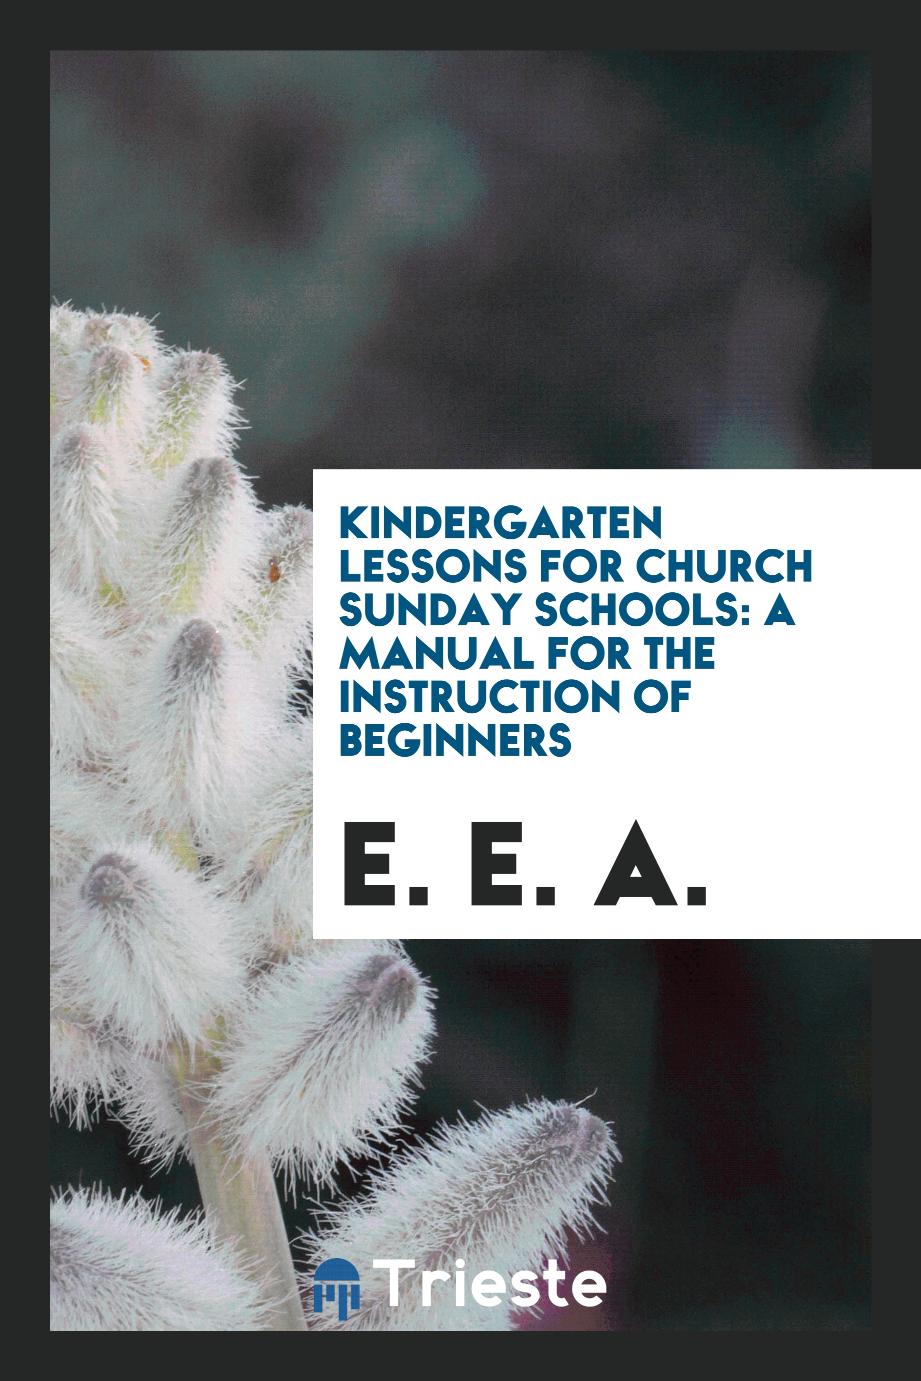 Kindergarten Lessons for Church Sunday Schools: A Manual for the Instruction of Beginners